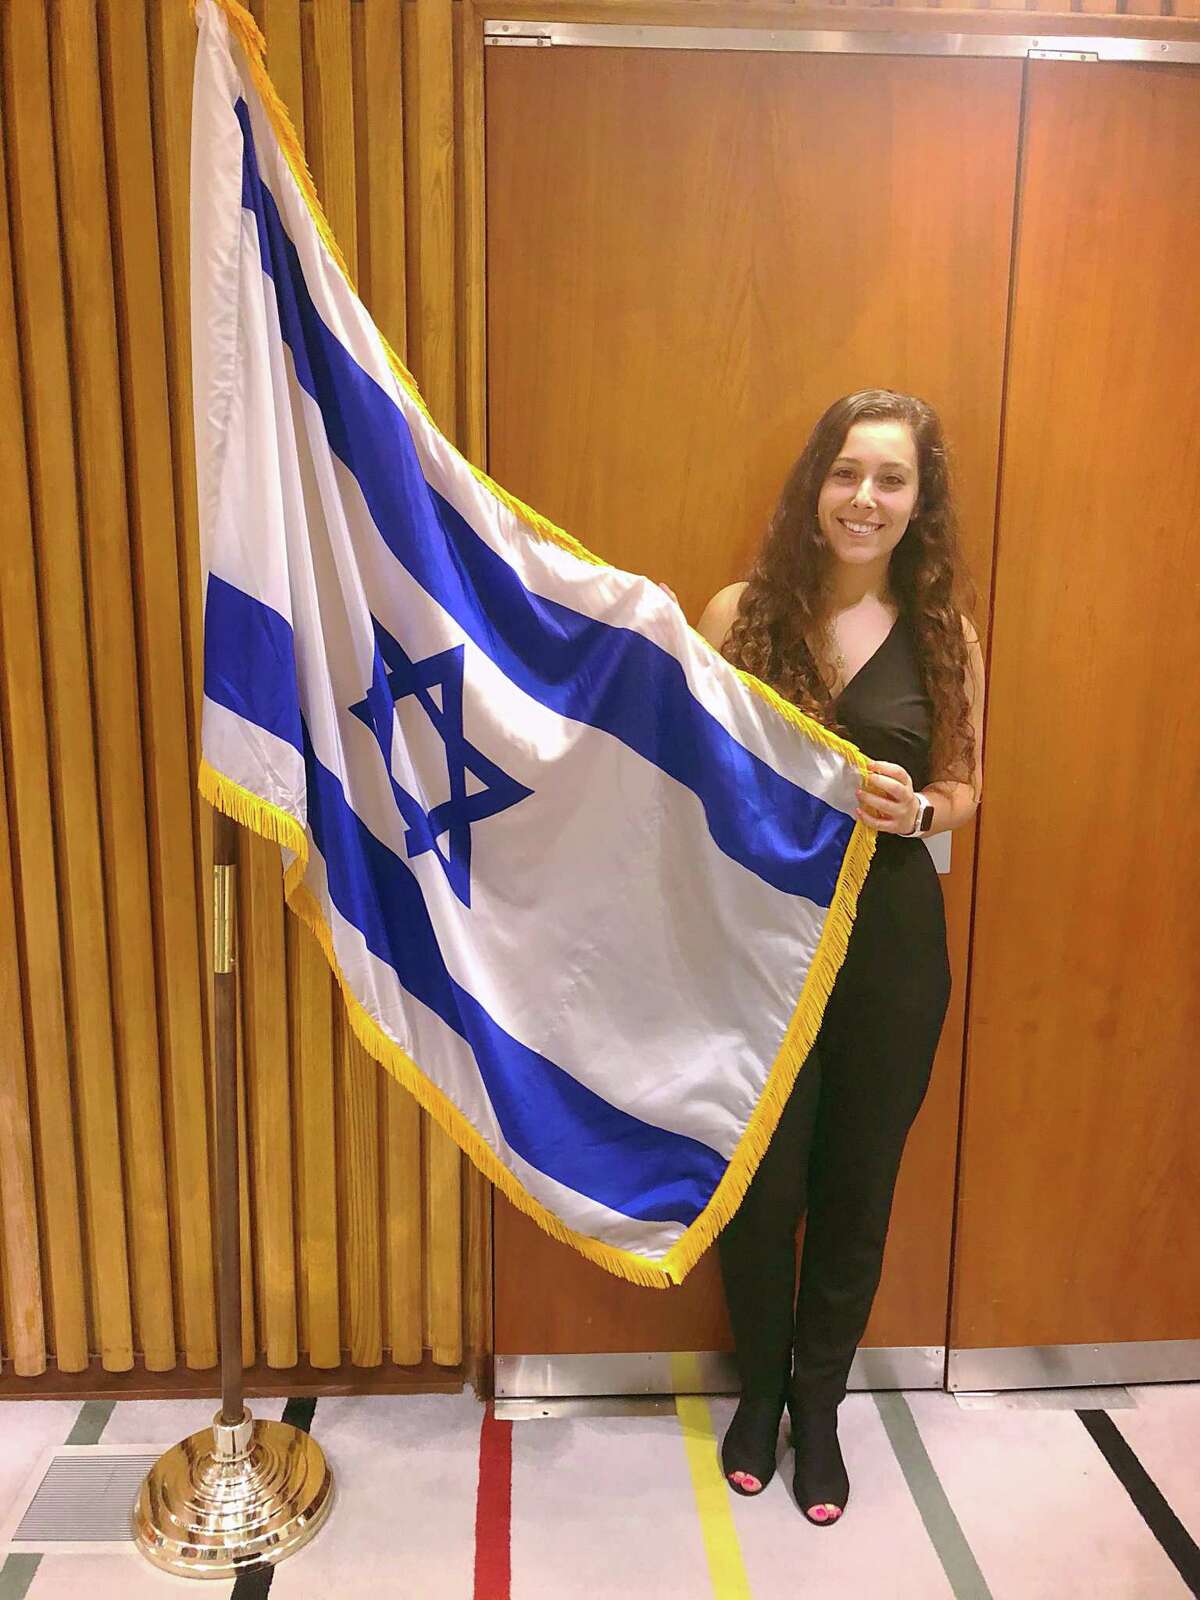 Dalia Zahger, co-founder of “Students Supporting Israel” at Columbia University, will speak Sunday, Sept. 15, in Ridgefield, Conn. at Congregation Shir Shalom.